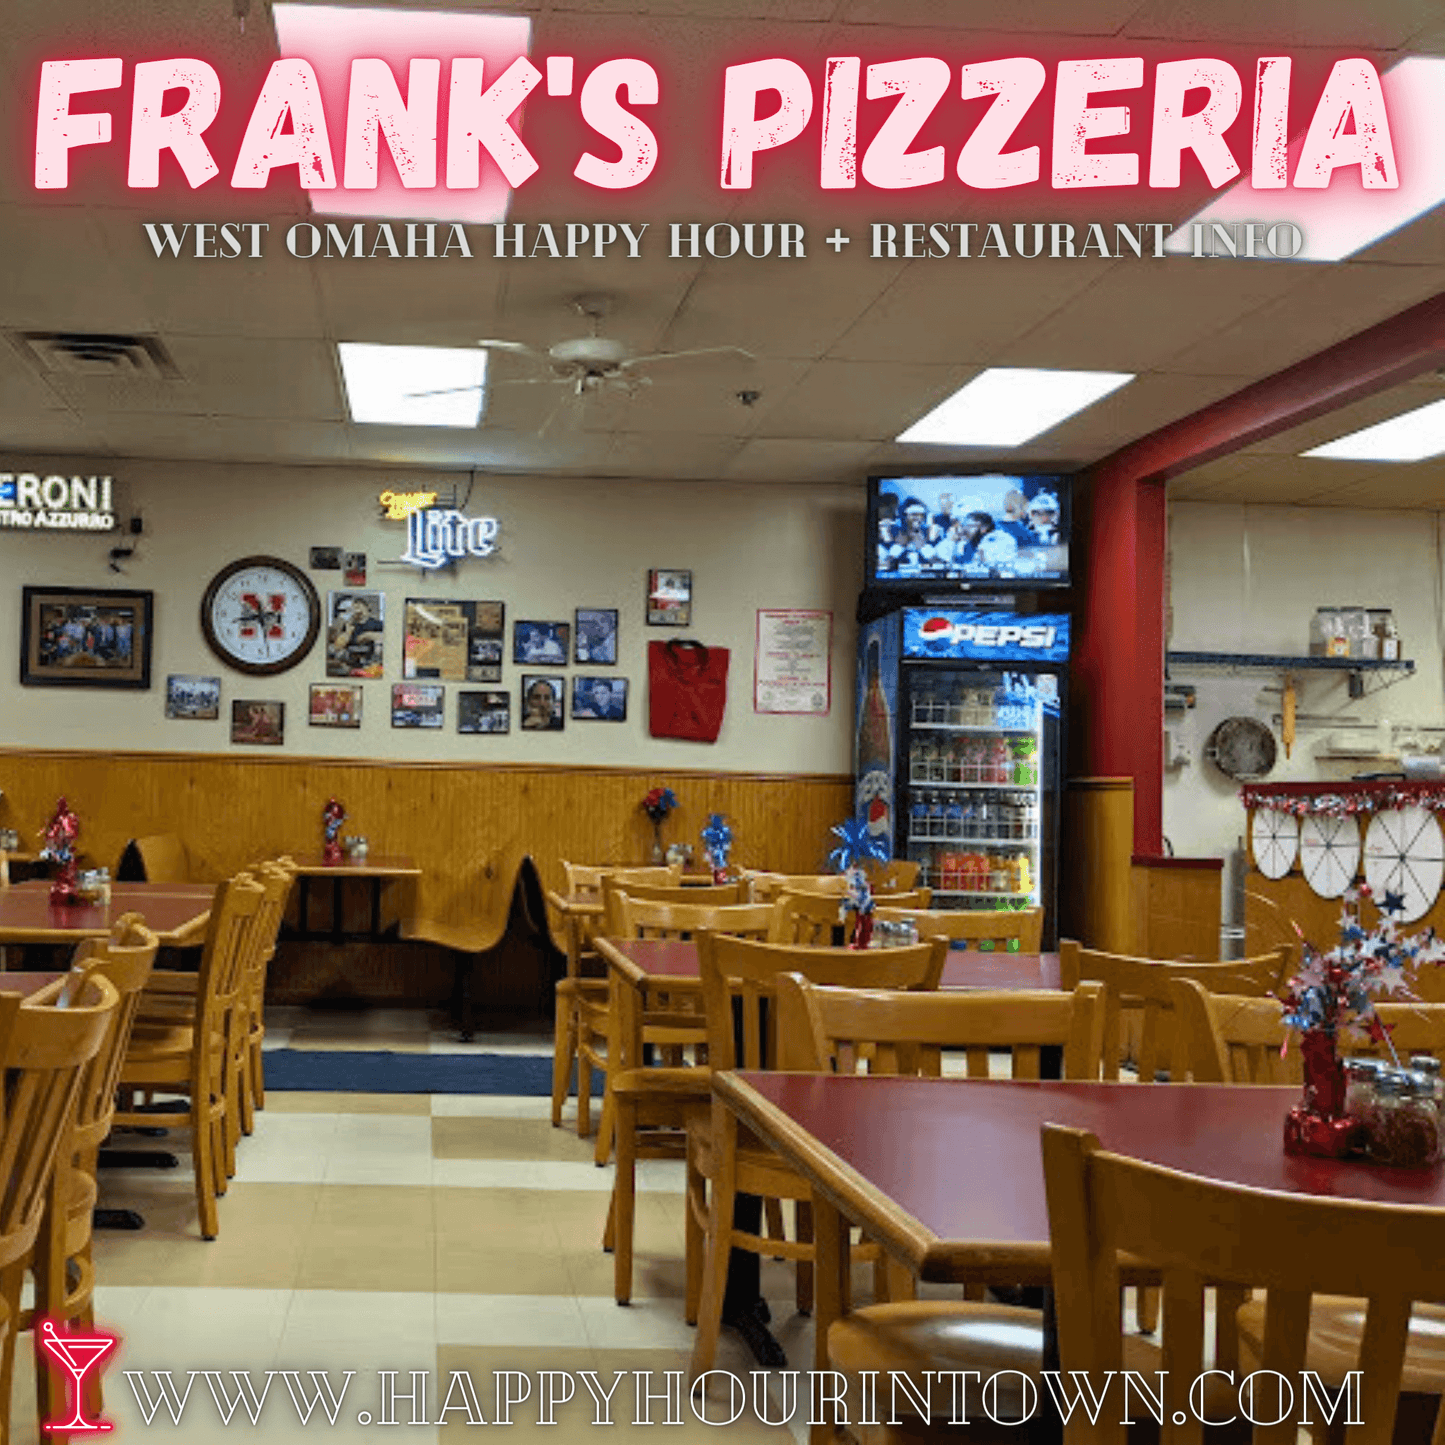 Frank's Pizzeria Omaha West Franks Pizza New York Stlye and Sicilian style